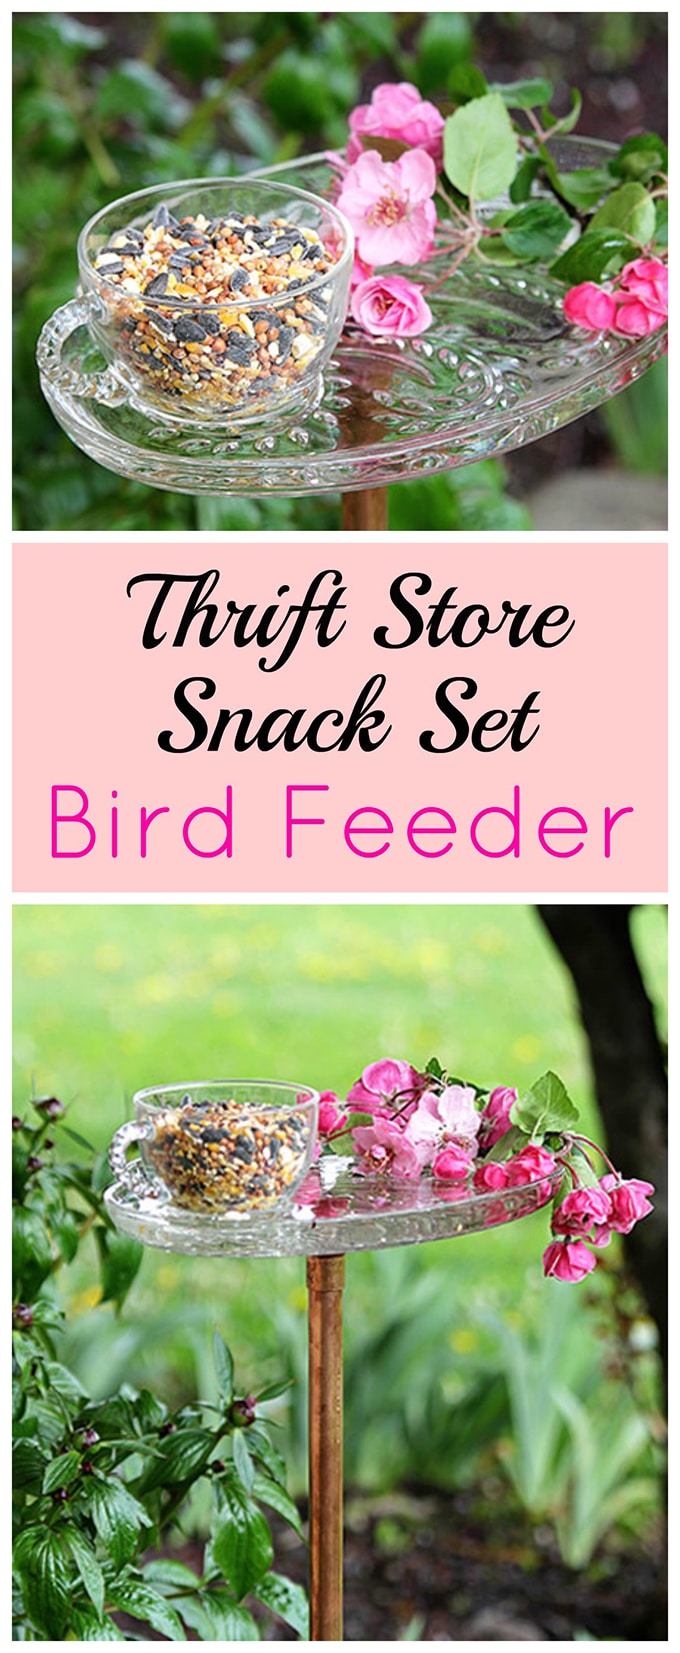 A vintage snack set can easily be repurposed into a CUTE bird feeder in a few simple steps. And I see these snack sets at the thrift store ALL THE TIME!